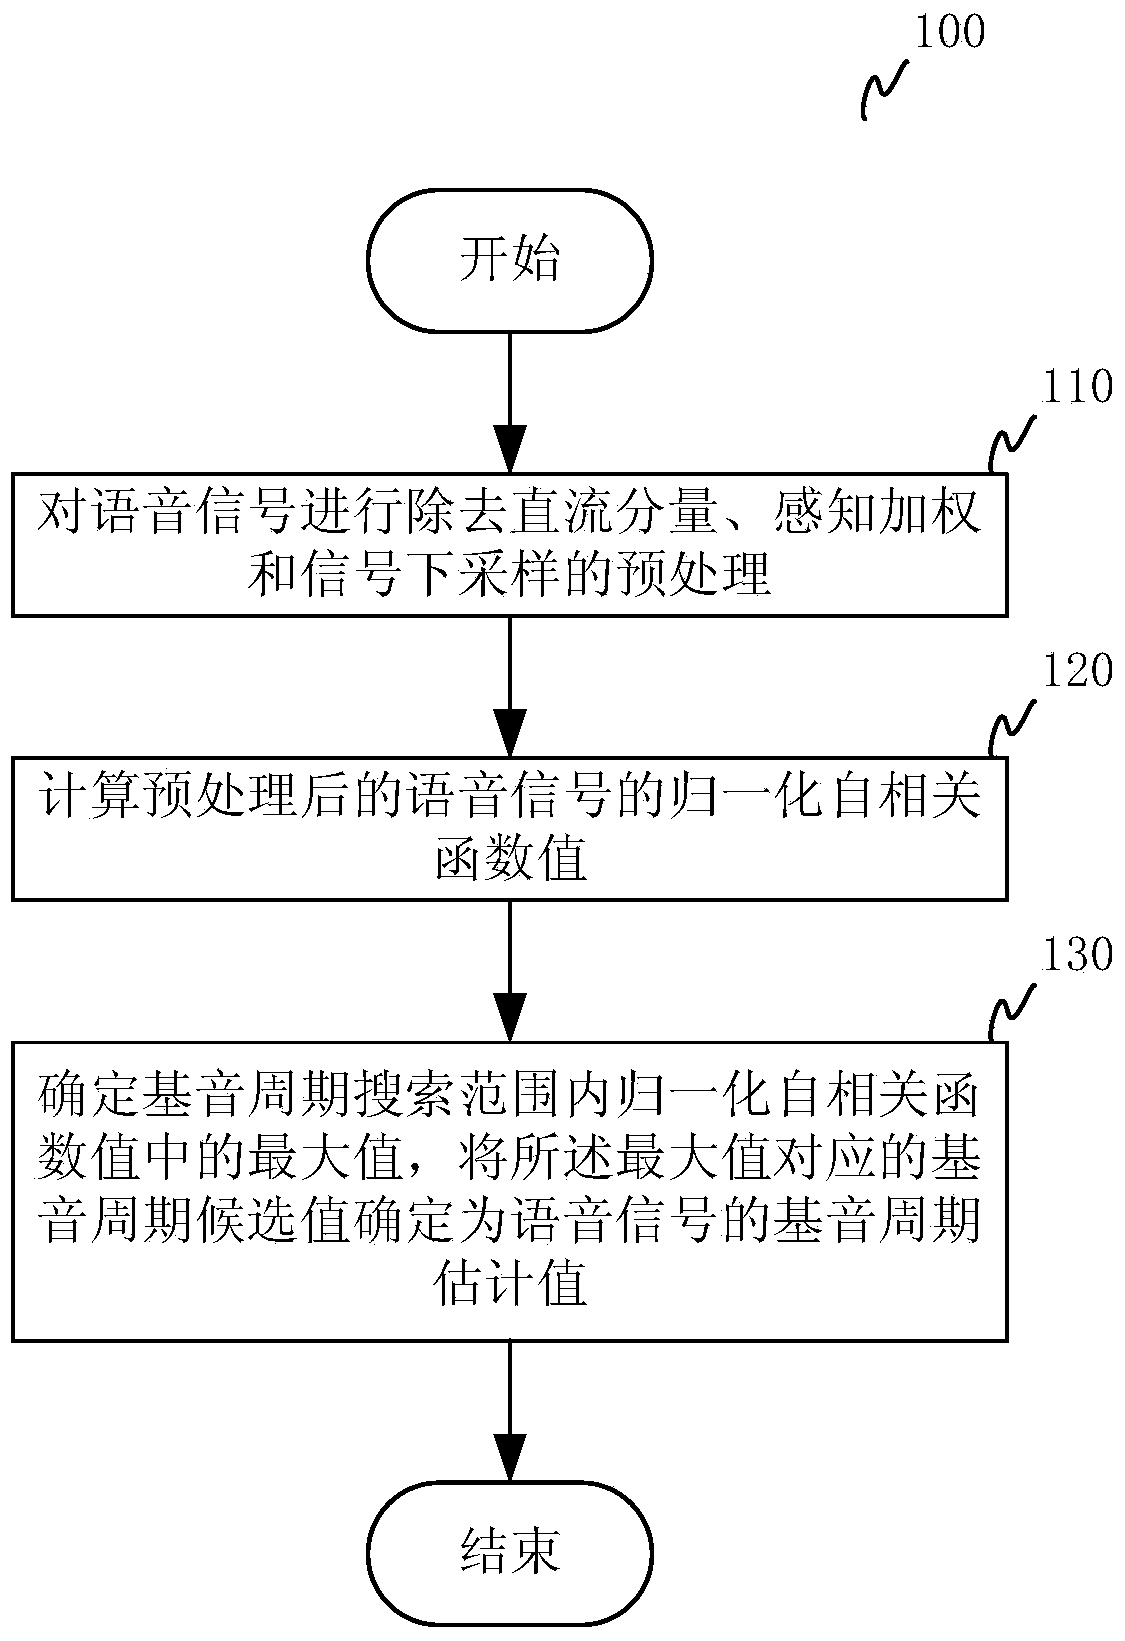 Voice pitch period estimation method and device